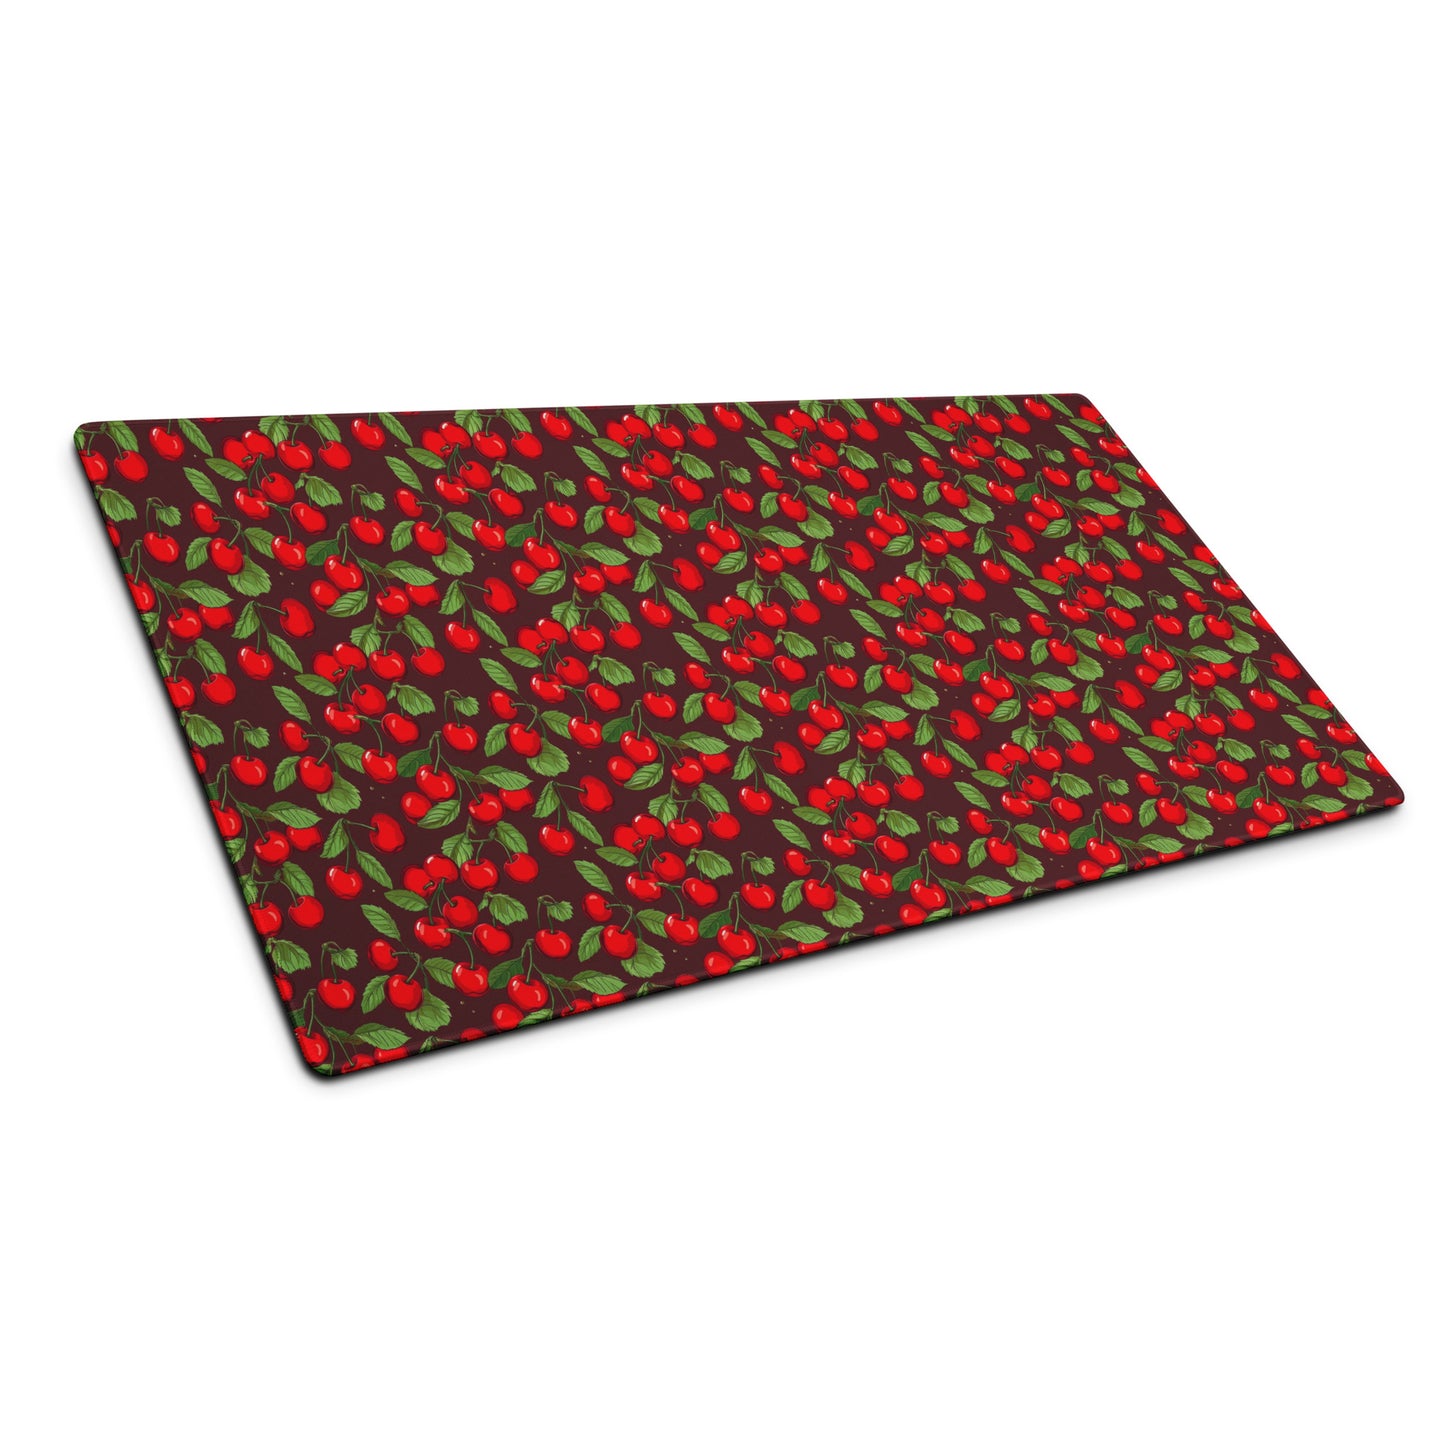 A 36" x 18" desk pad with cherries all over it shown at an angle. Red in color.